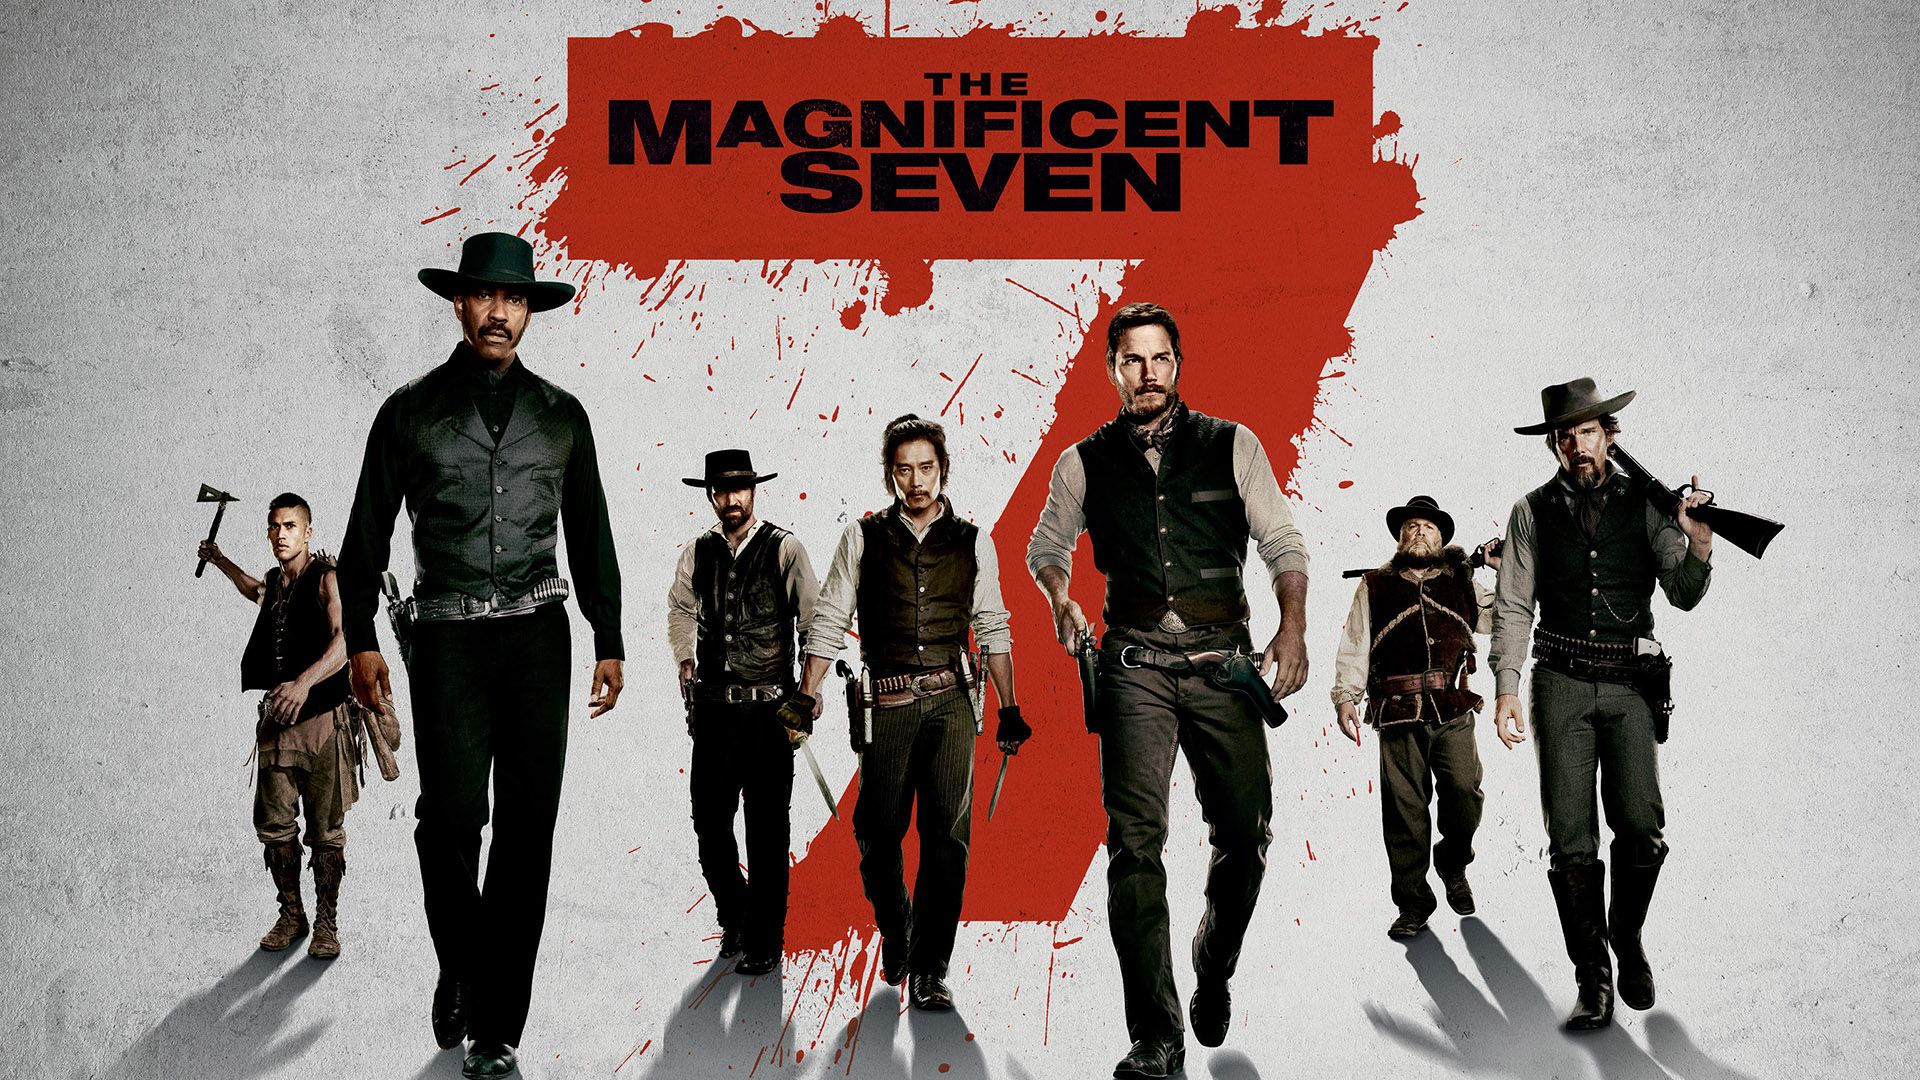 The Magnificent Seven - Excellent Remake of an Iconic Western